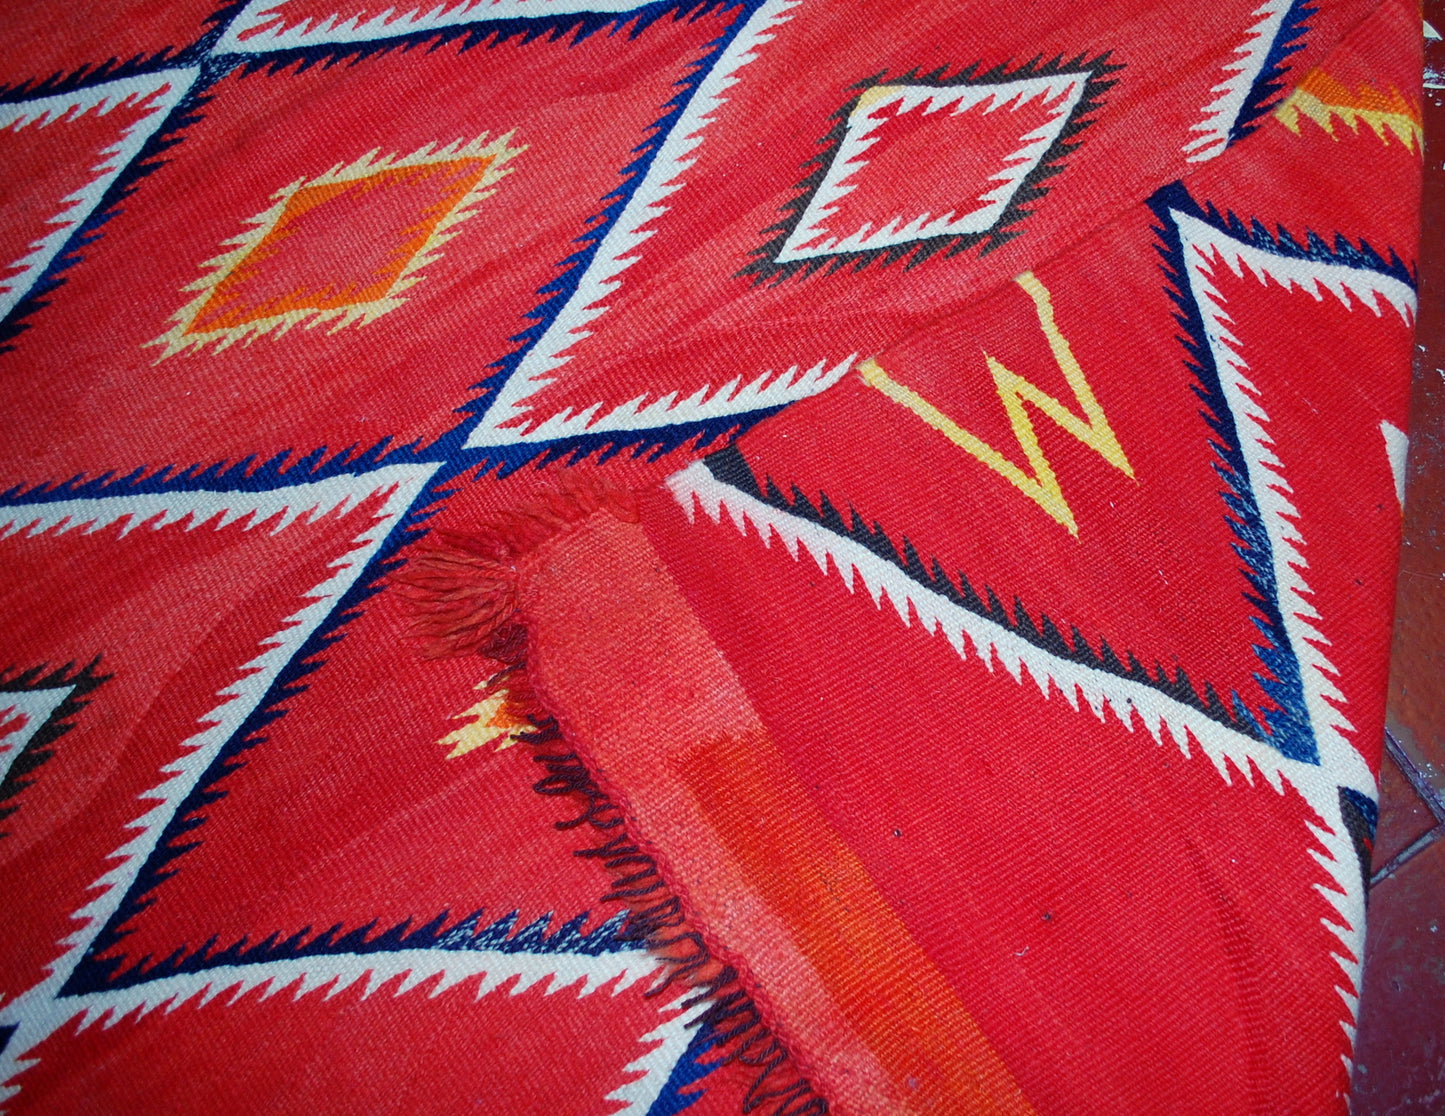 Antique hand-woven American-Indian Navajo blanket in original good condition. The blanket has been made in the end of 19th century in bright red shade. Repeating diamonds are in white and indigo shades. Smaller inner diamonds are in yellow and orange.